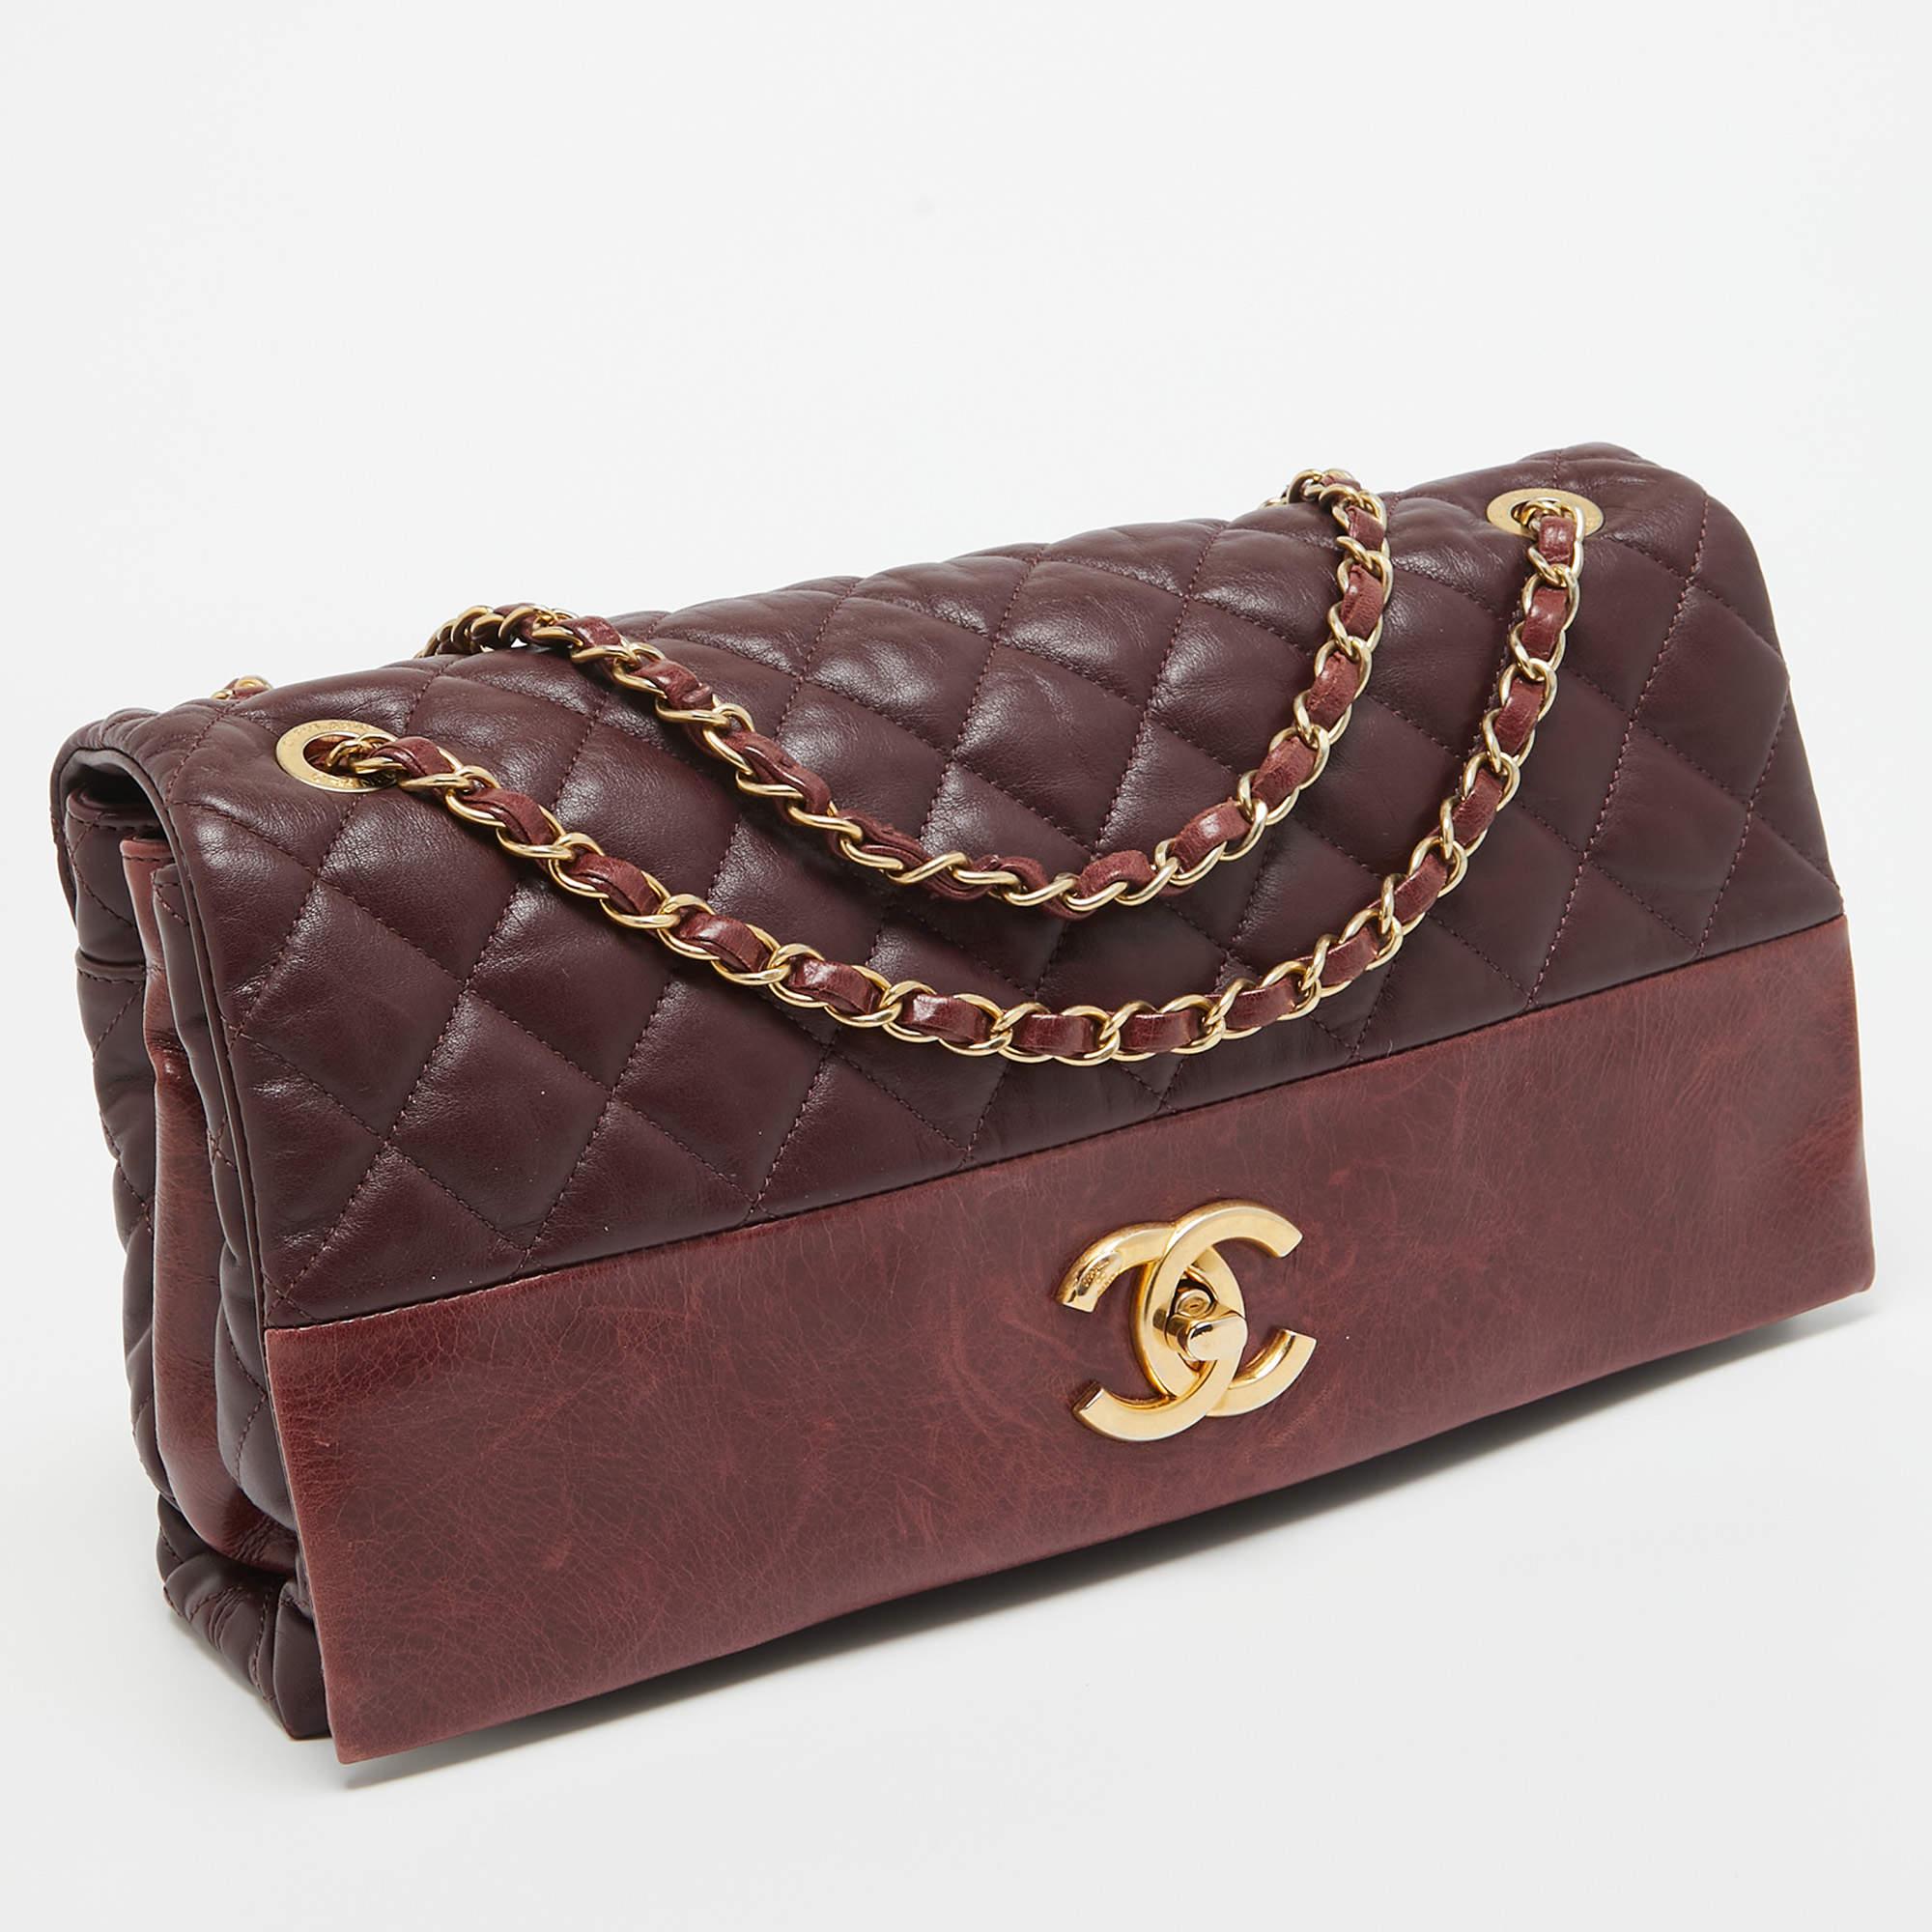 Chanel Burgundy Quilted Leather Soft Elegance Flap Bag In Good Condition For Sale In Dubai, Al Qouz 2